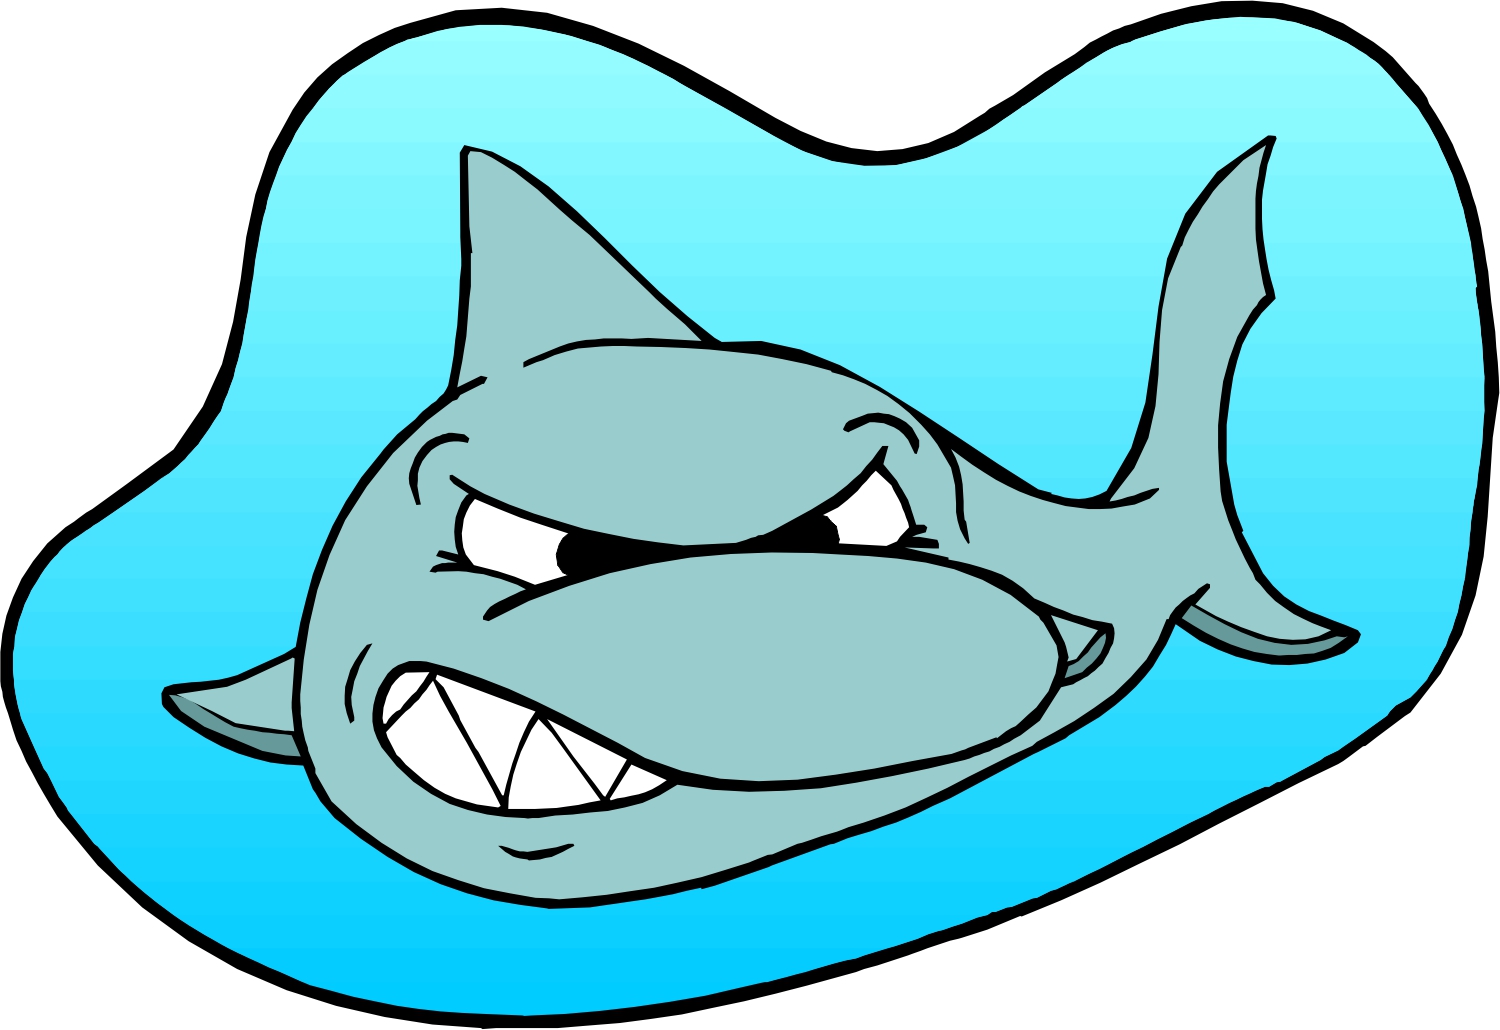 10 Great White Shark Cartoon Pictures Free Cliparts That You Can